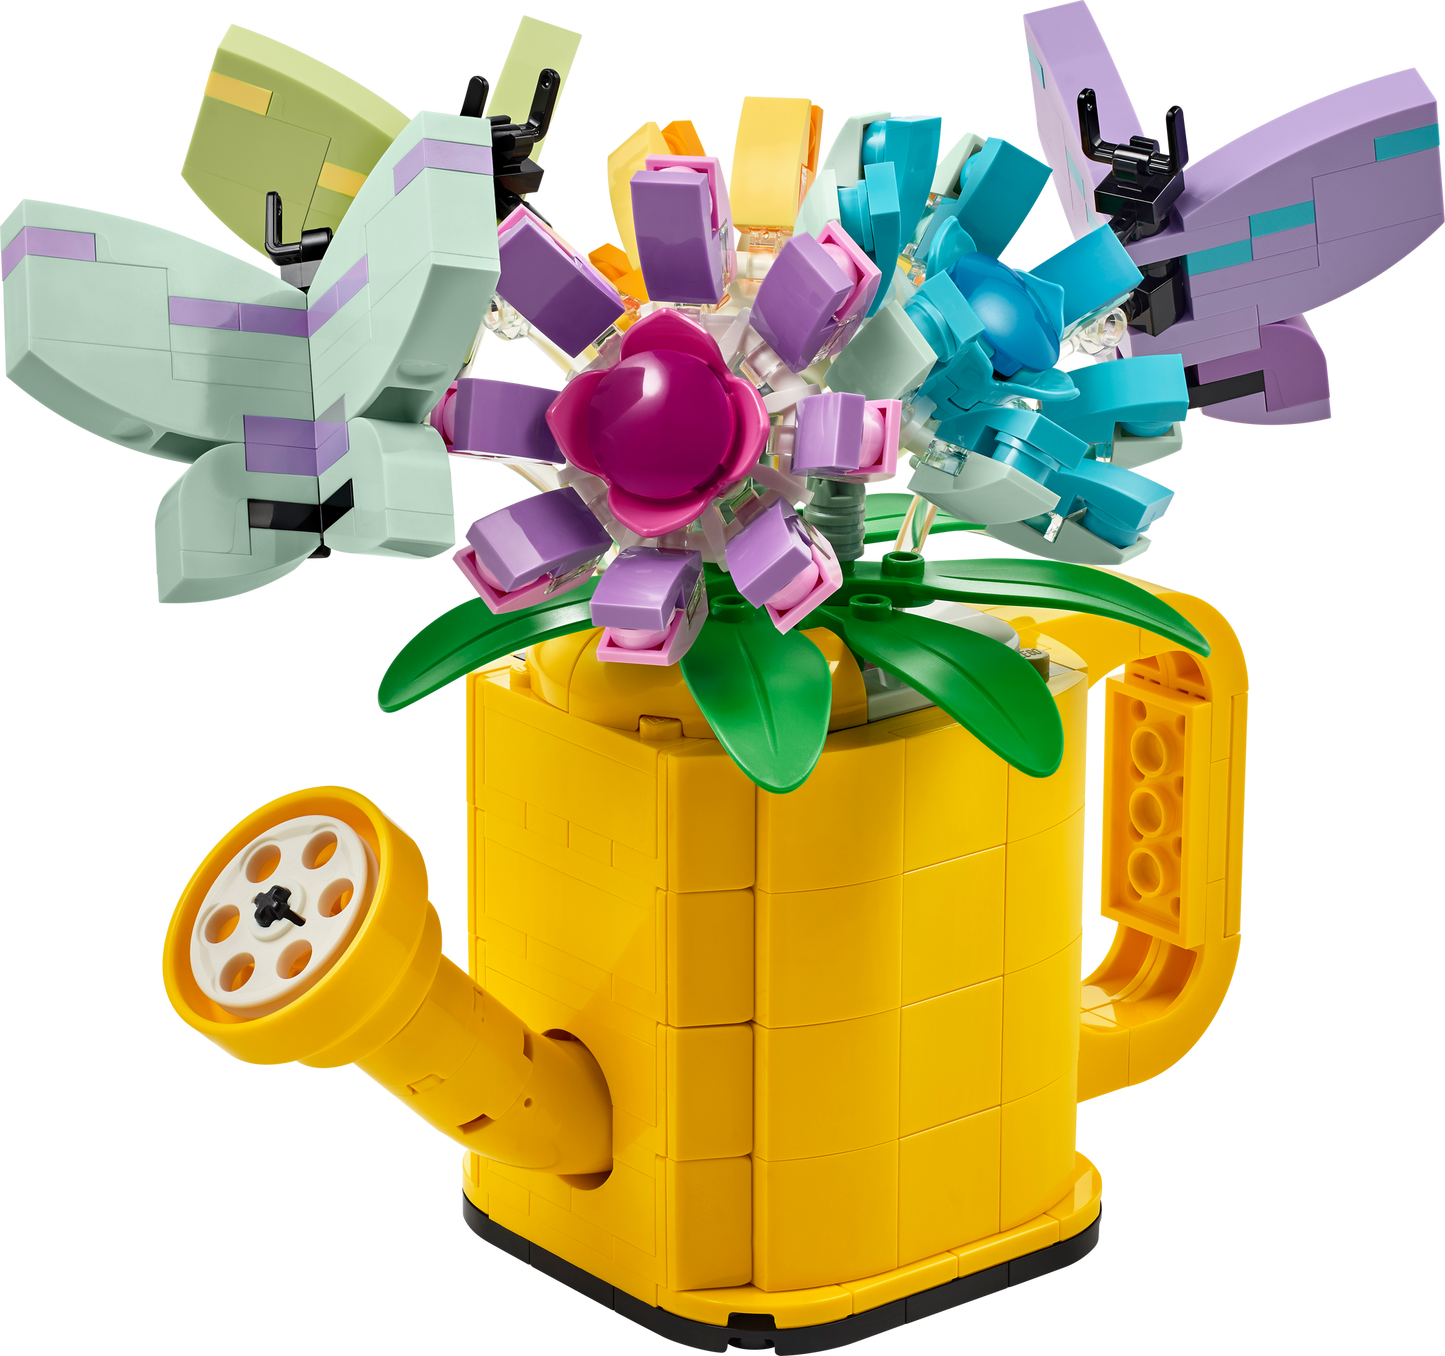 31149 Flowers in Watering Can